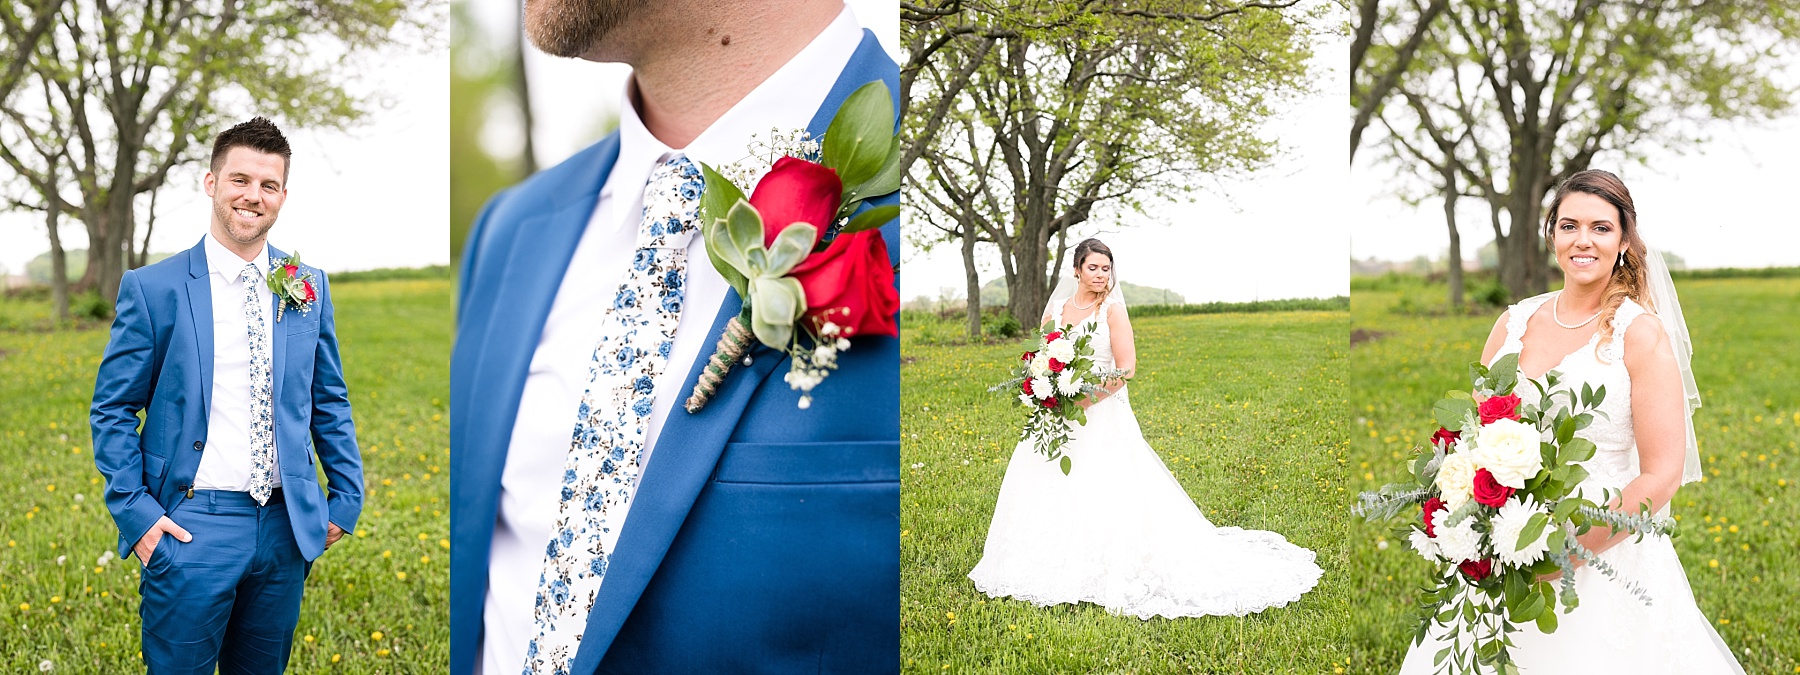 A May wedding set in the rolling hills just outside Madison at Villa Buonincontro in Fort Atkinson, WI